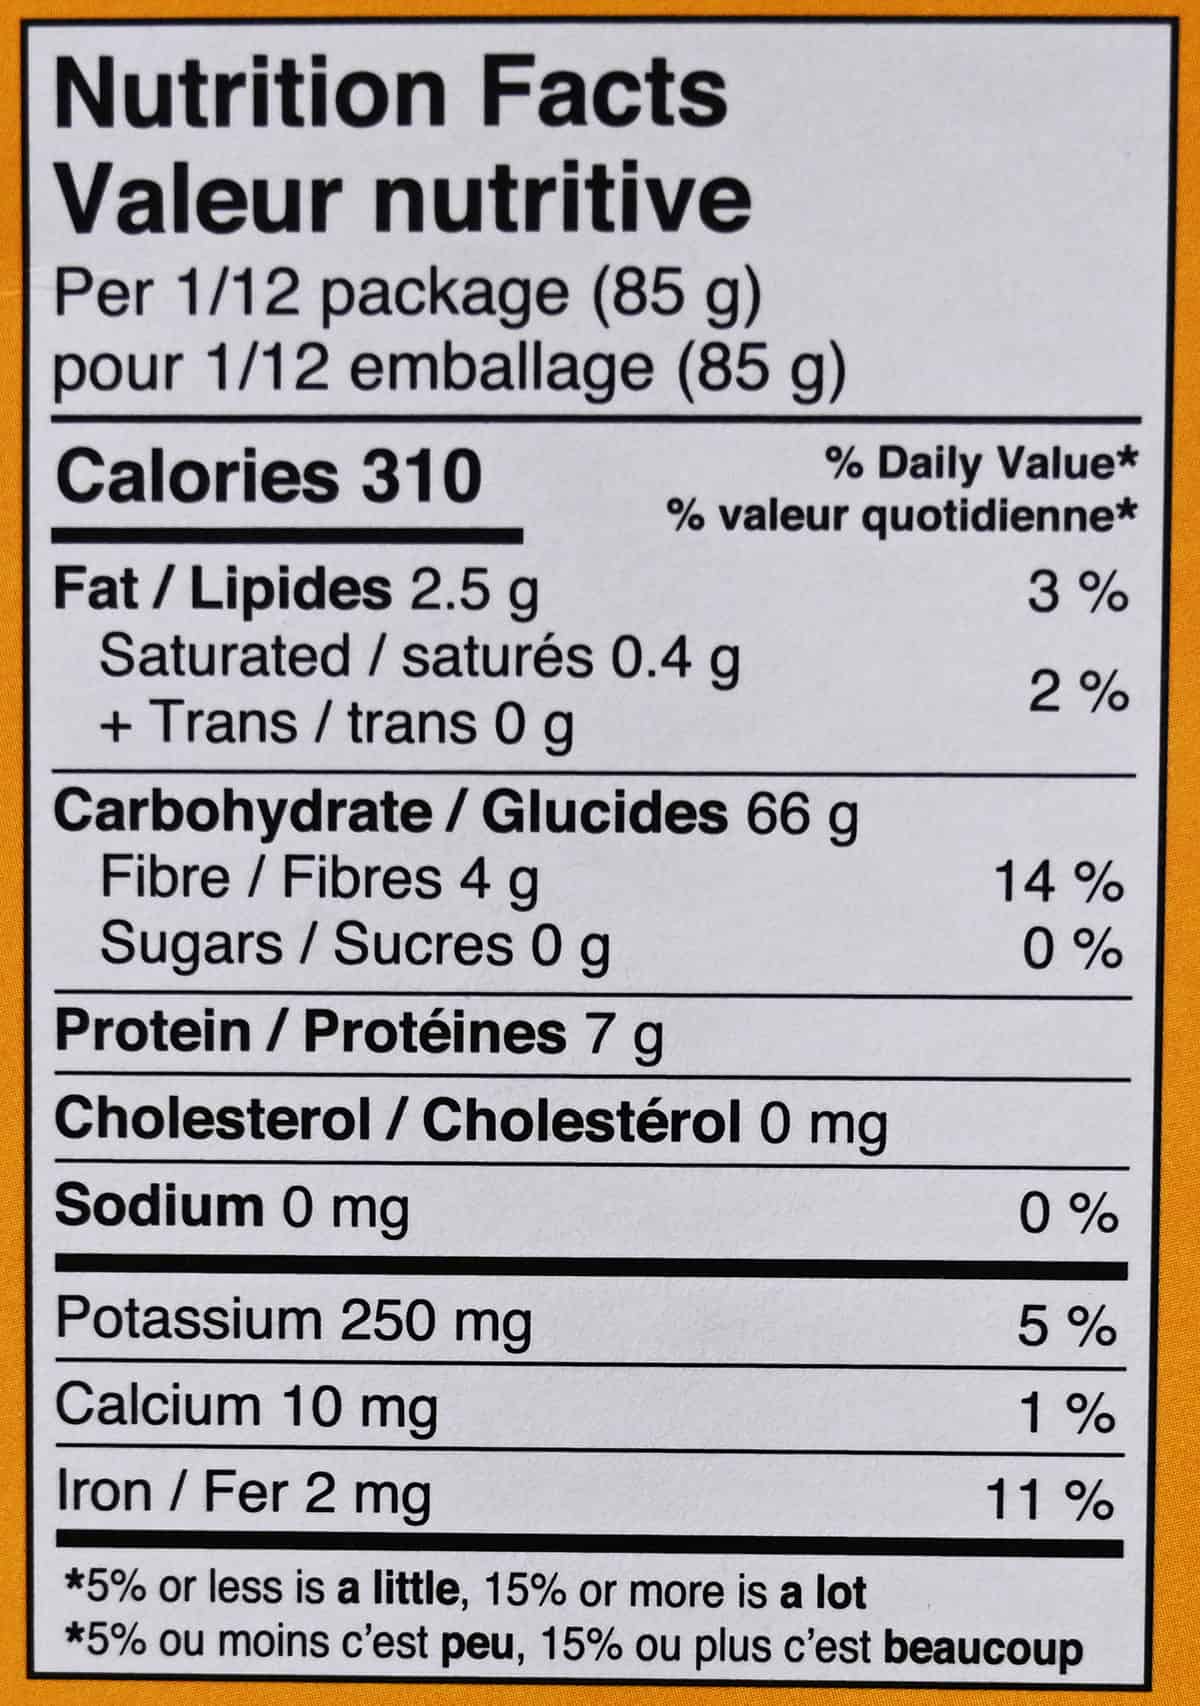 Image of the nutrition facts label from the box.